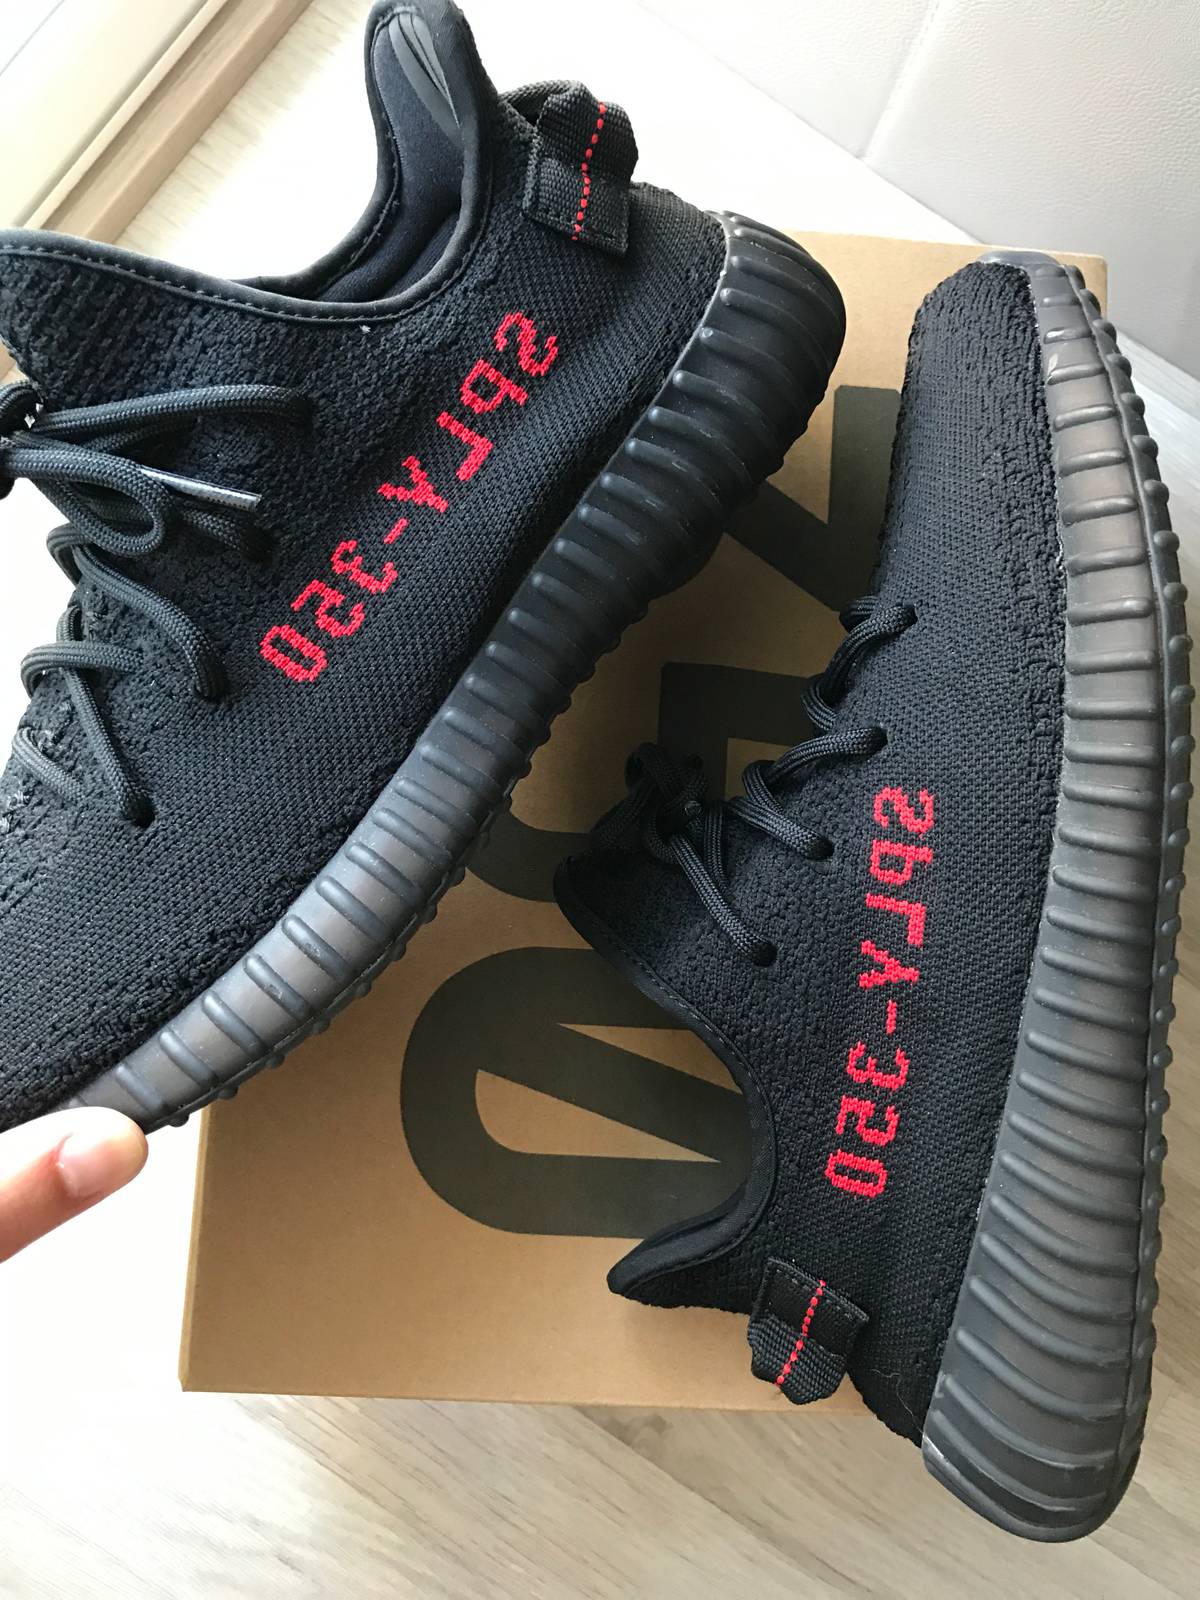 Newest Updated UA Yeezy Boost 350 V2 Bred SPLY 350 Black Red